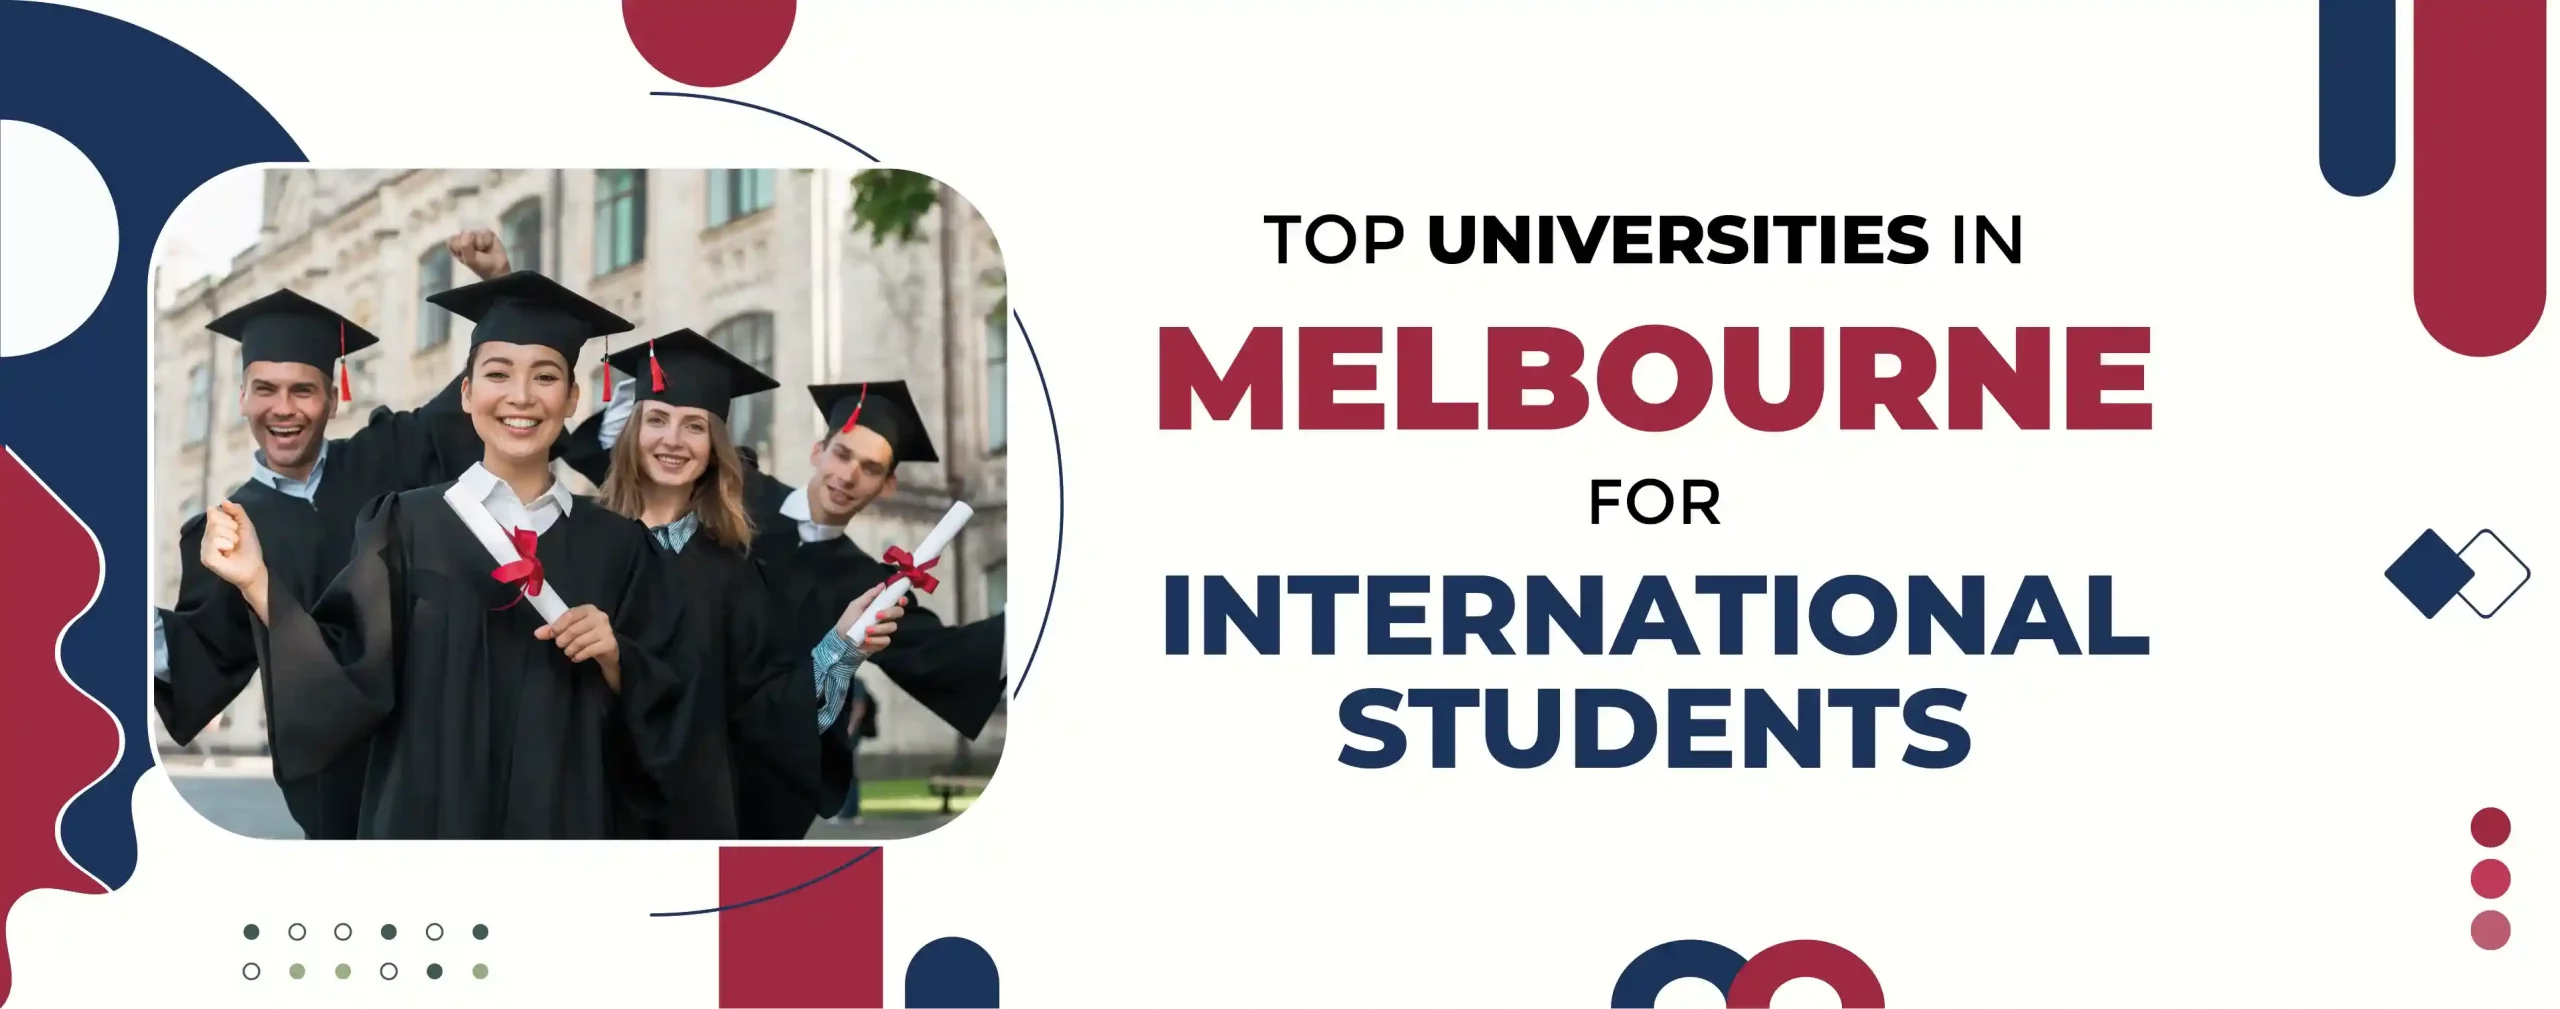 Top Universities in Melbourne for International Students